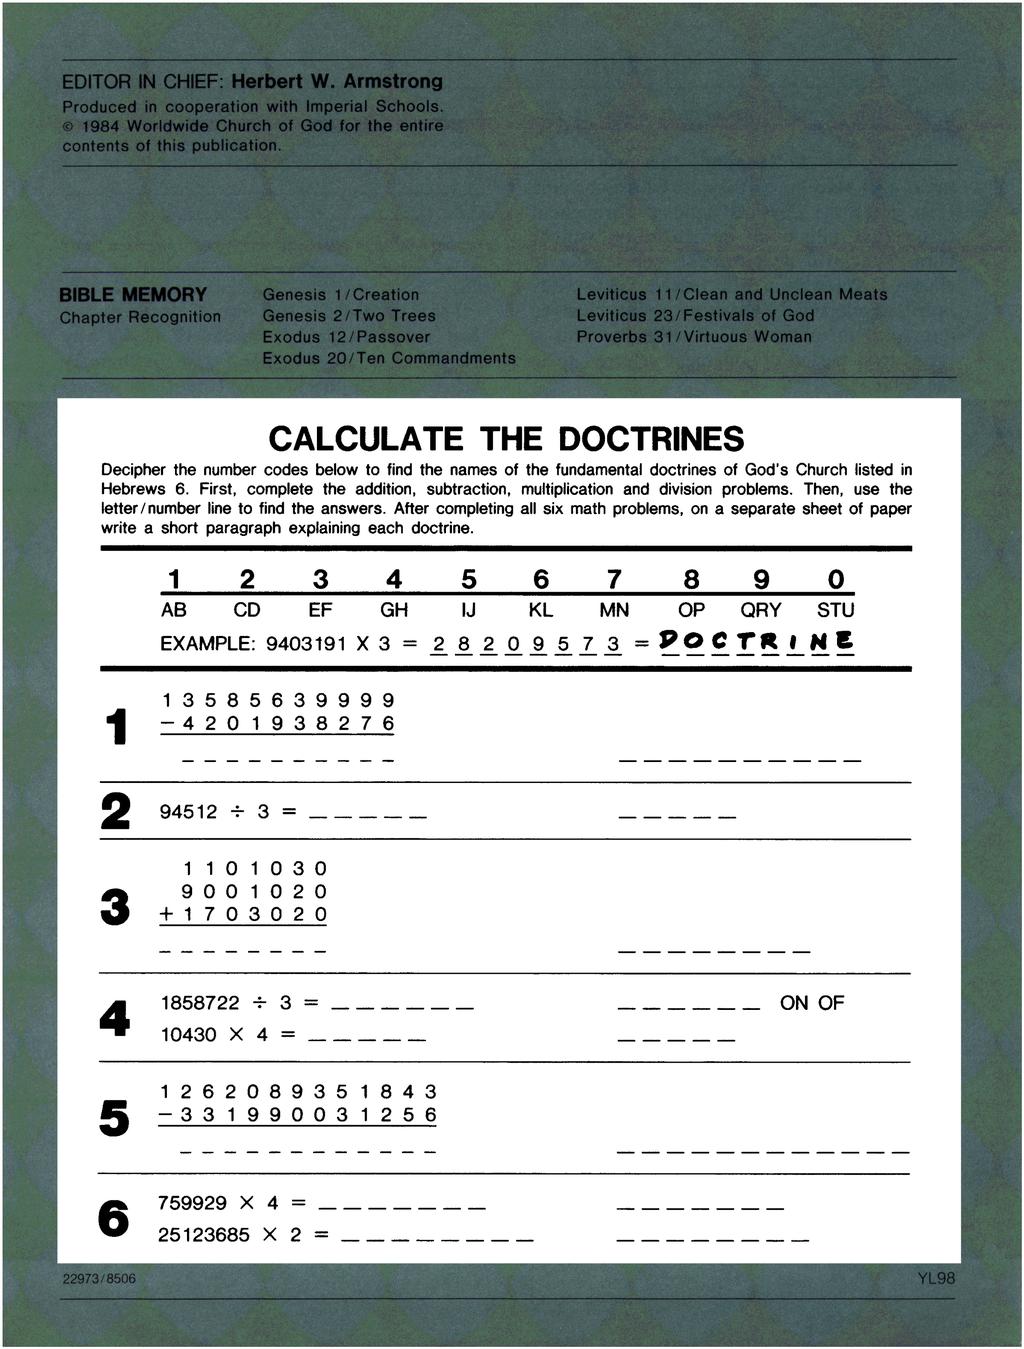 CALCULATE THE DOCTRINES Decipher the number codes below to find the names of the fundamental doctrines of God's Church listed in Hebrews 6.